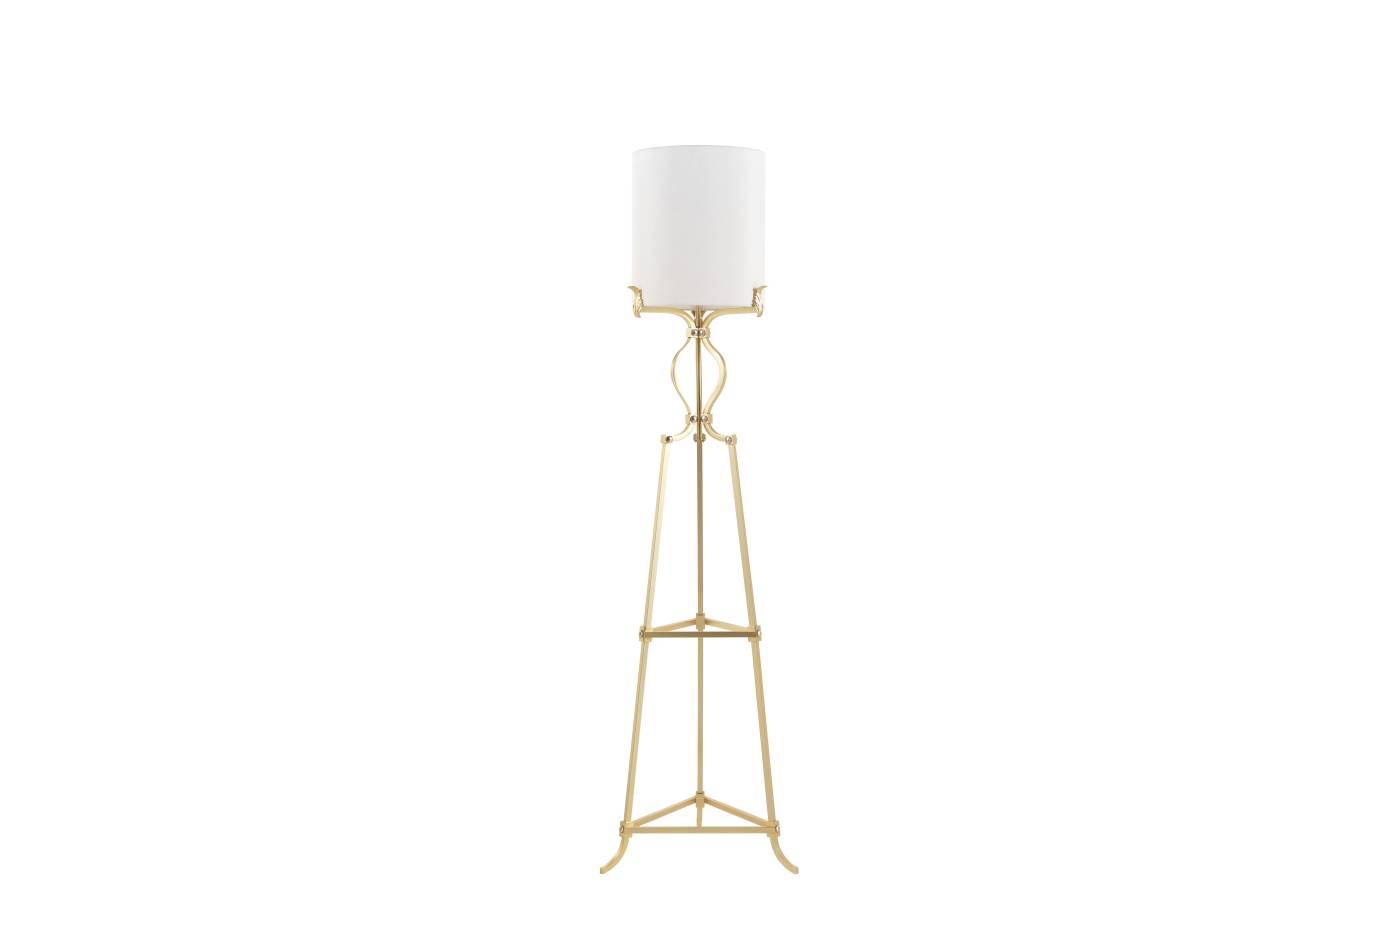 SELENIA floor lamp – Transform your space with sophisticated Made in Italy classic lights.